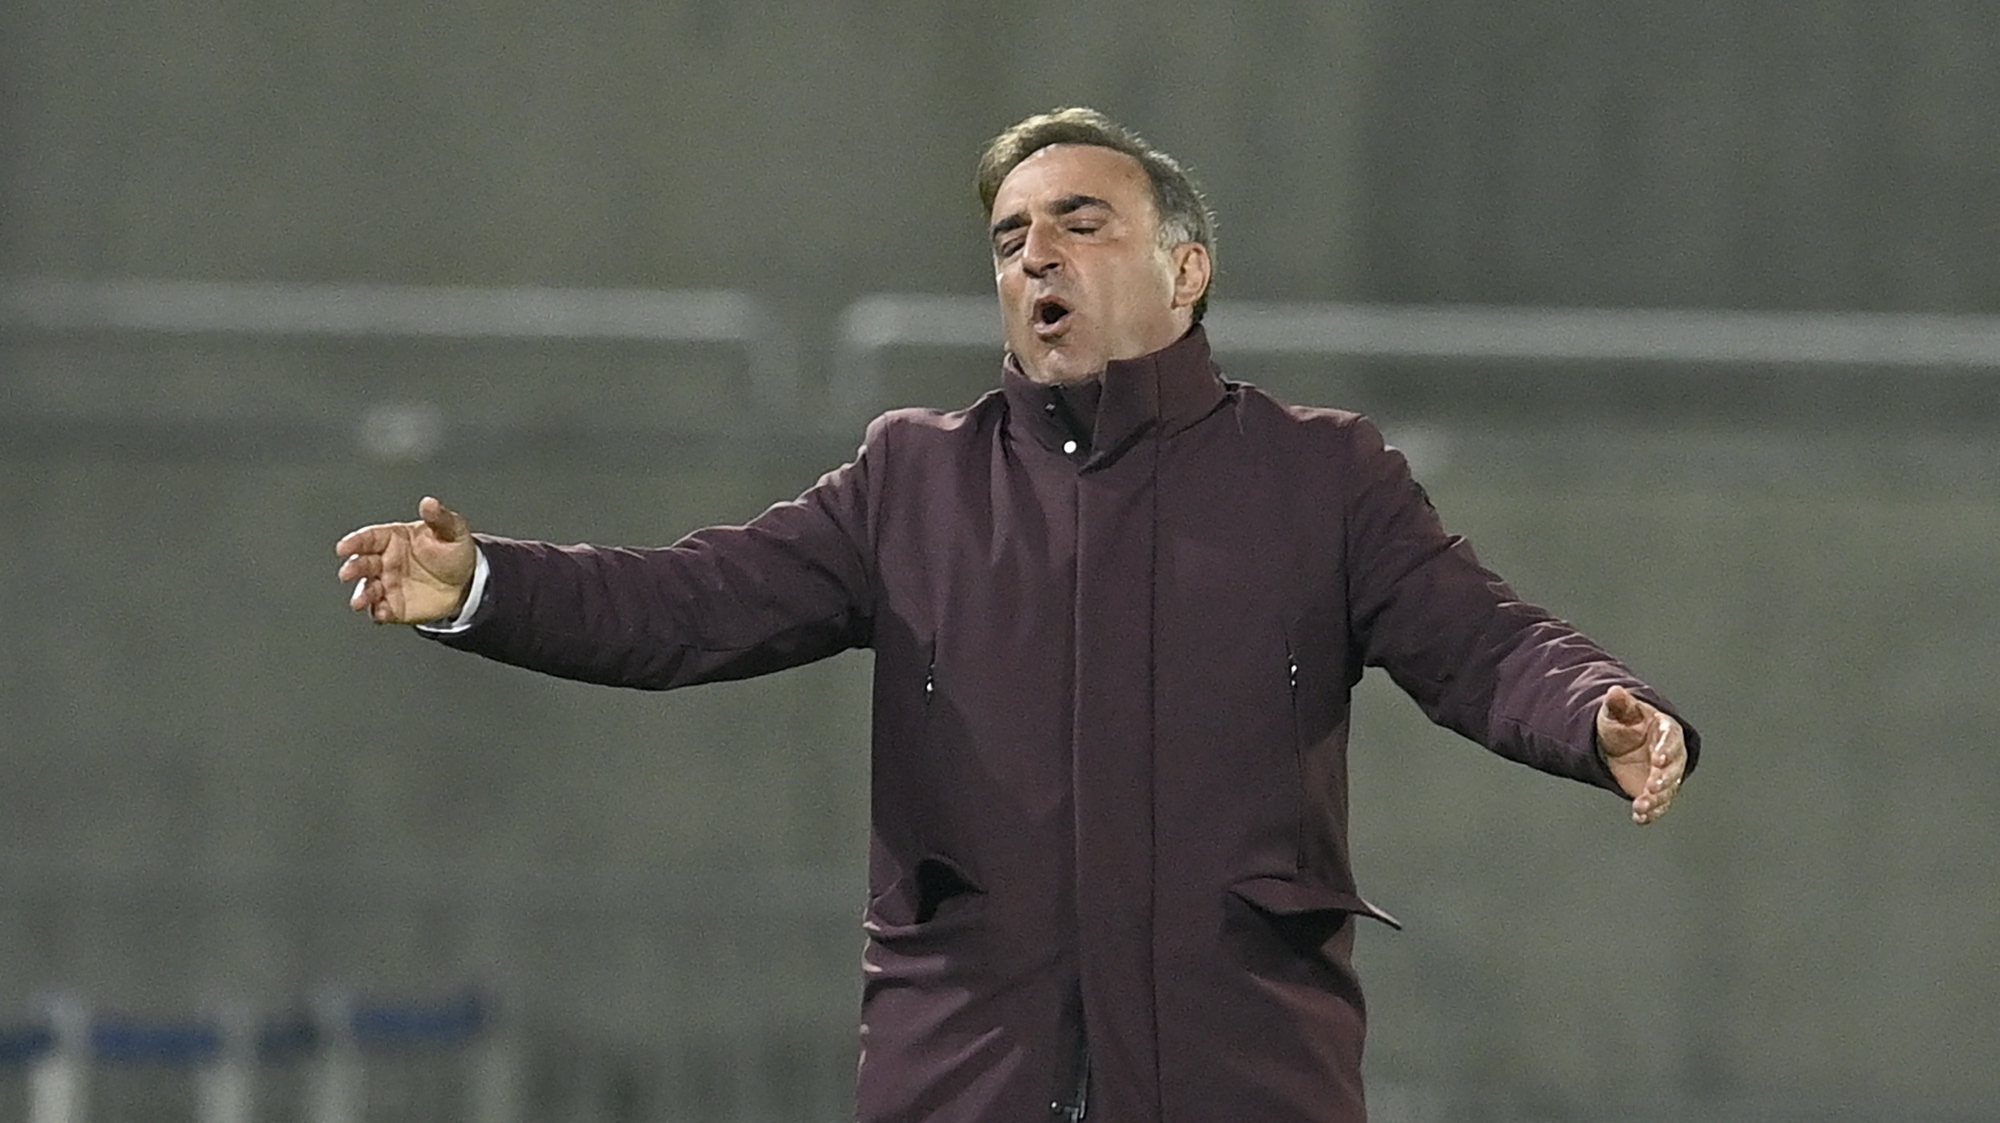 epa09536661 Braga&#039;s head coach Carlos Carvalhal reacts during the UEFA Europa League group stage soccer match between Ludogorets Razgrad and Sporting Braga in Razgrad, Bulgaria, 21 October 2021.  EPA/Vassil Donev